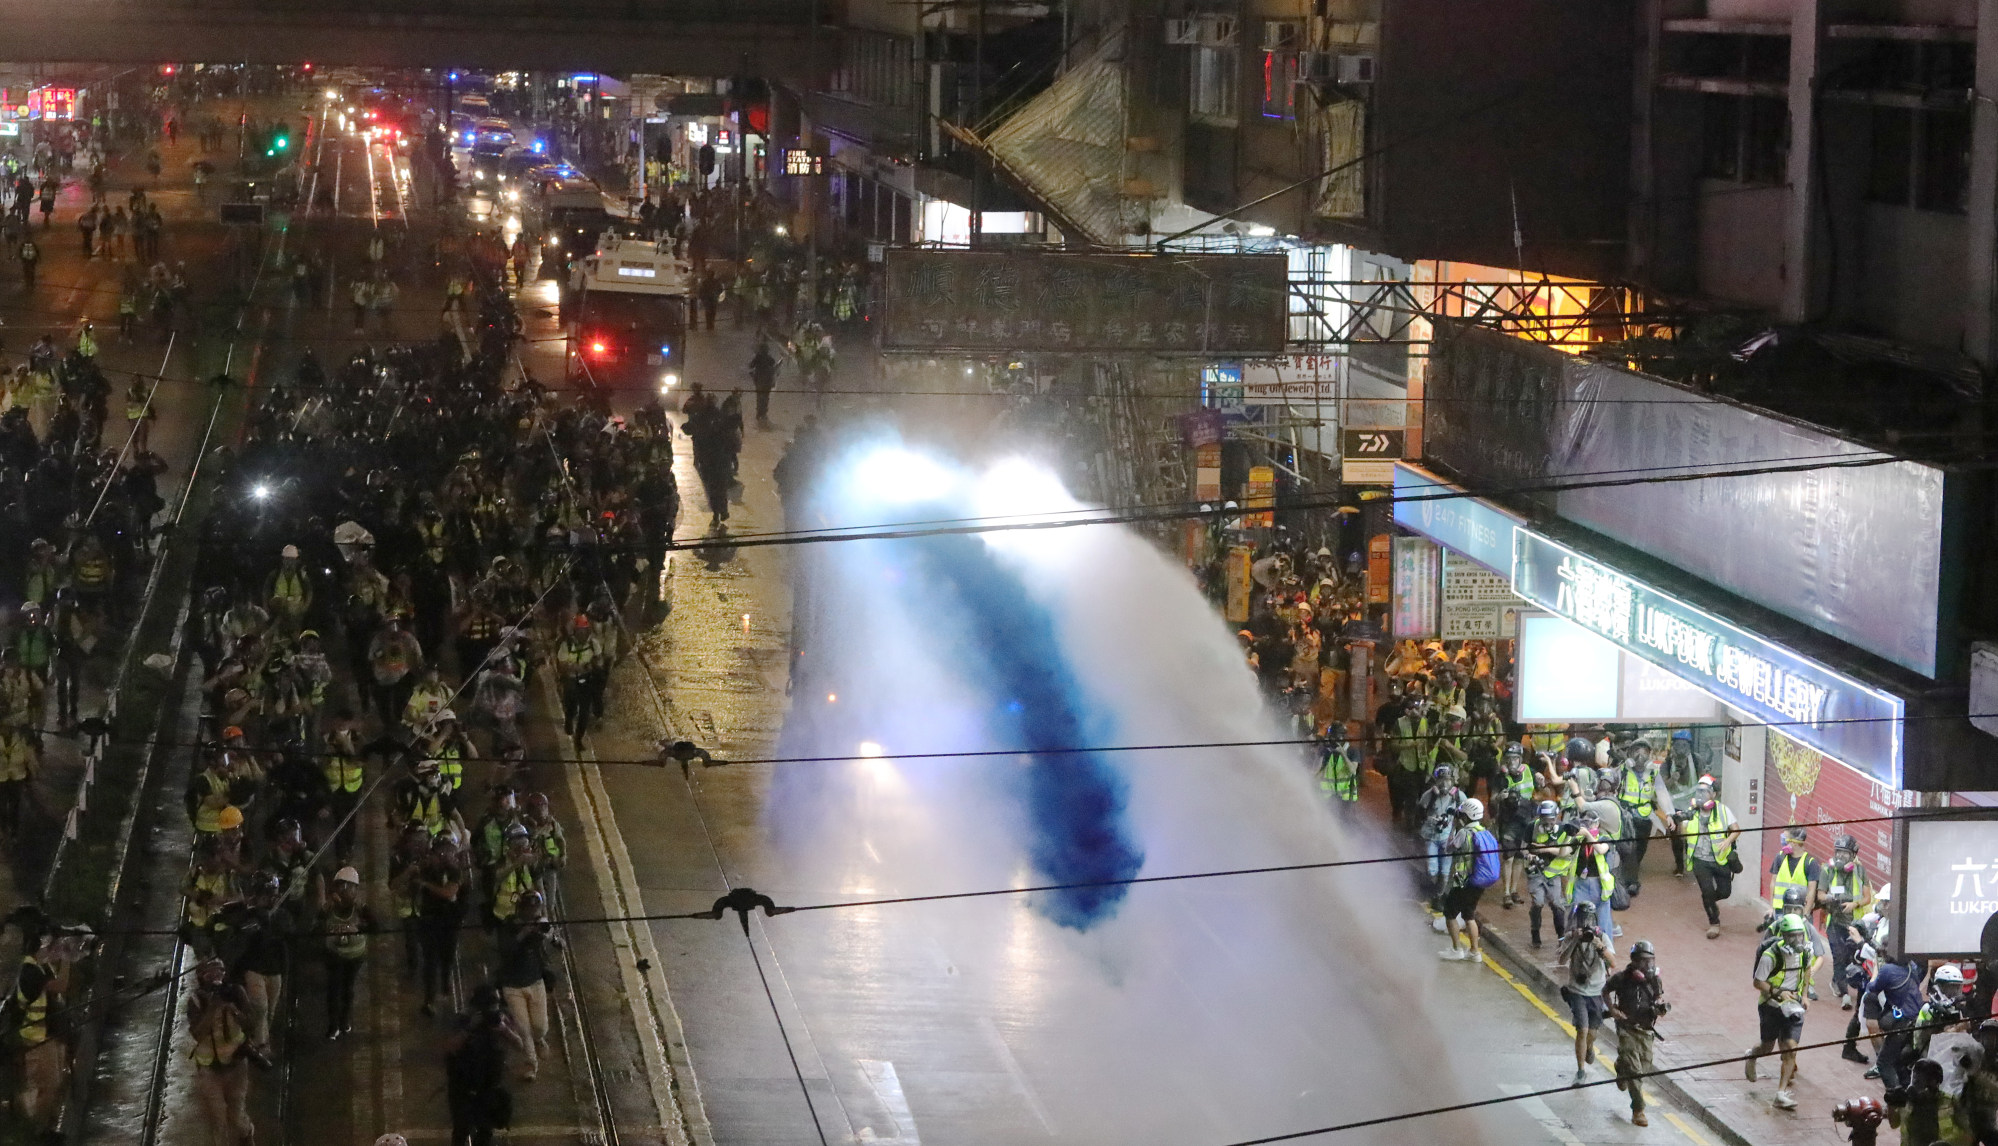 Police deploy a water cannon during a protest in 2019. Photo: May Tse